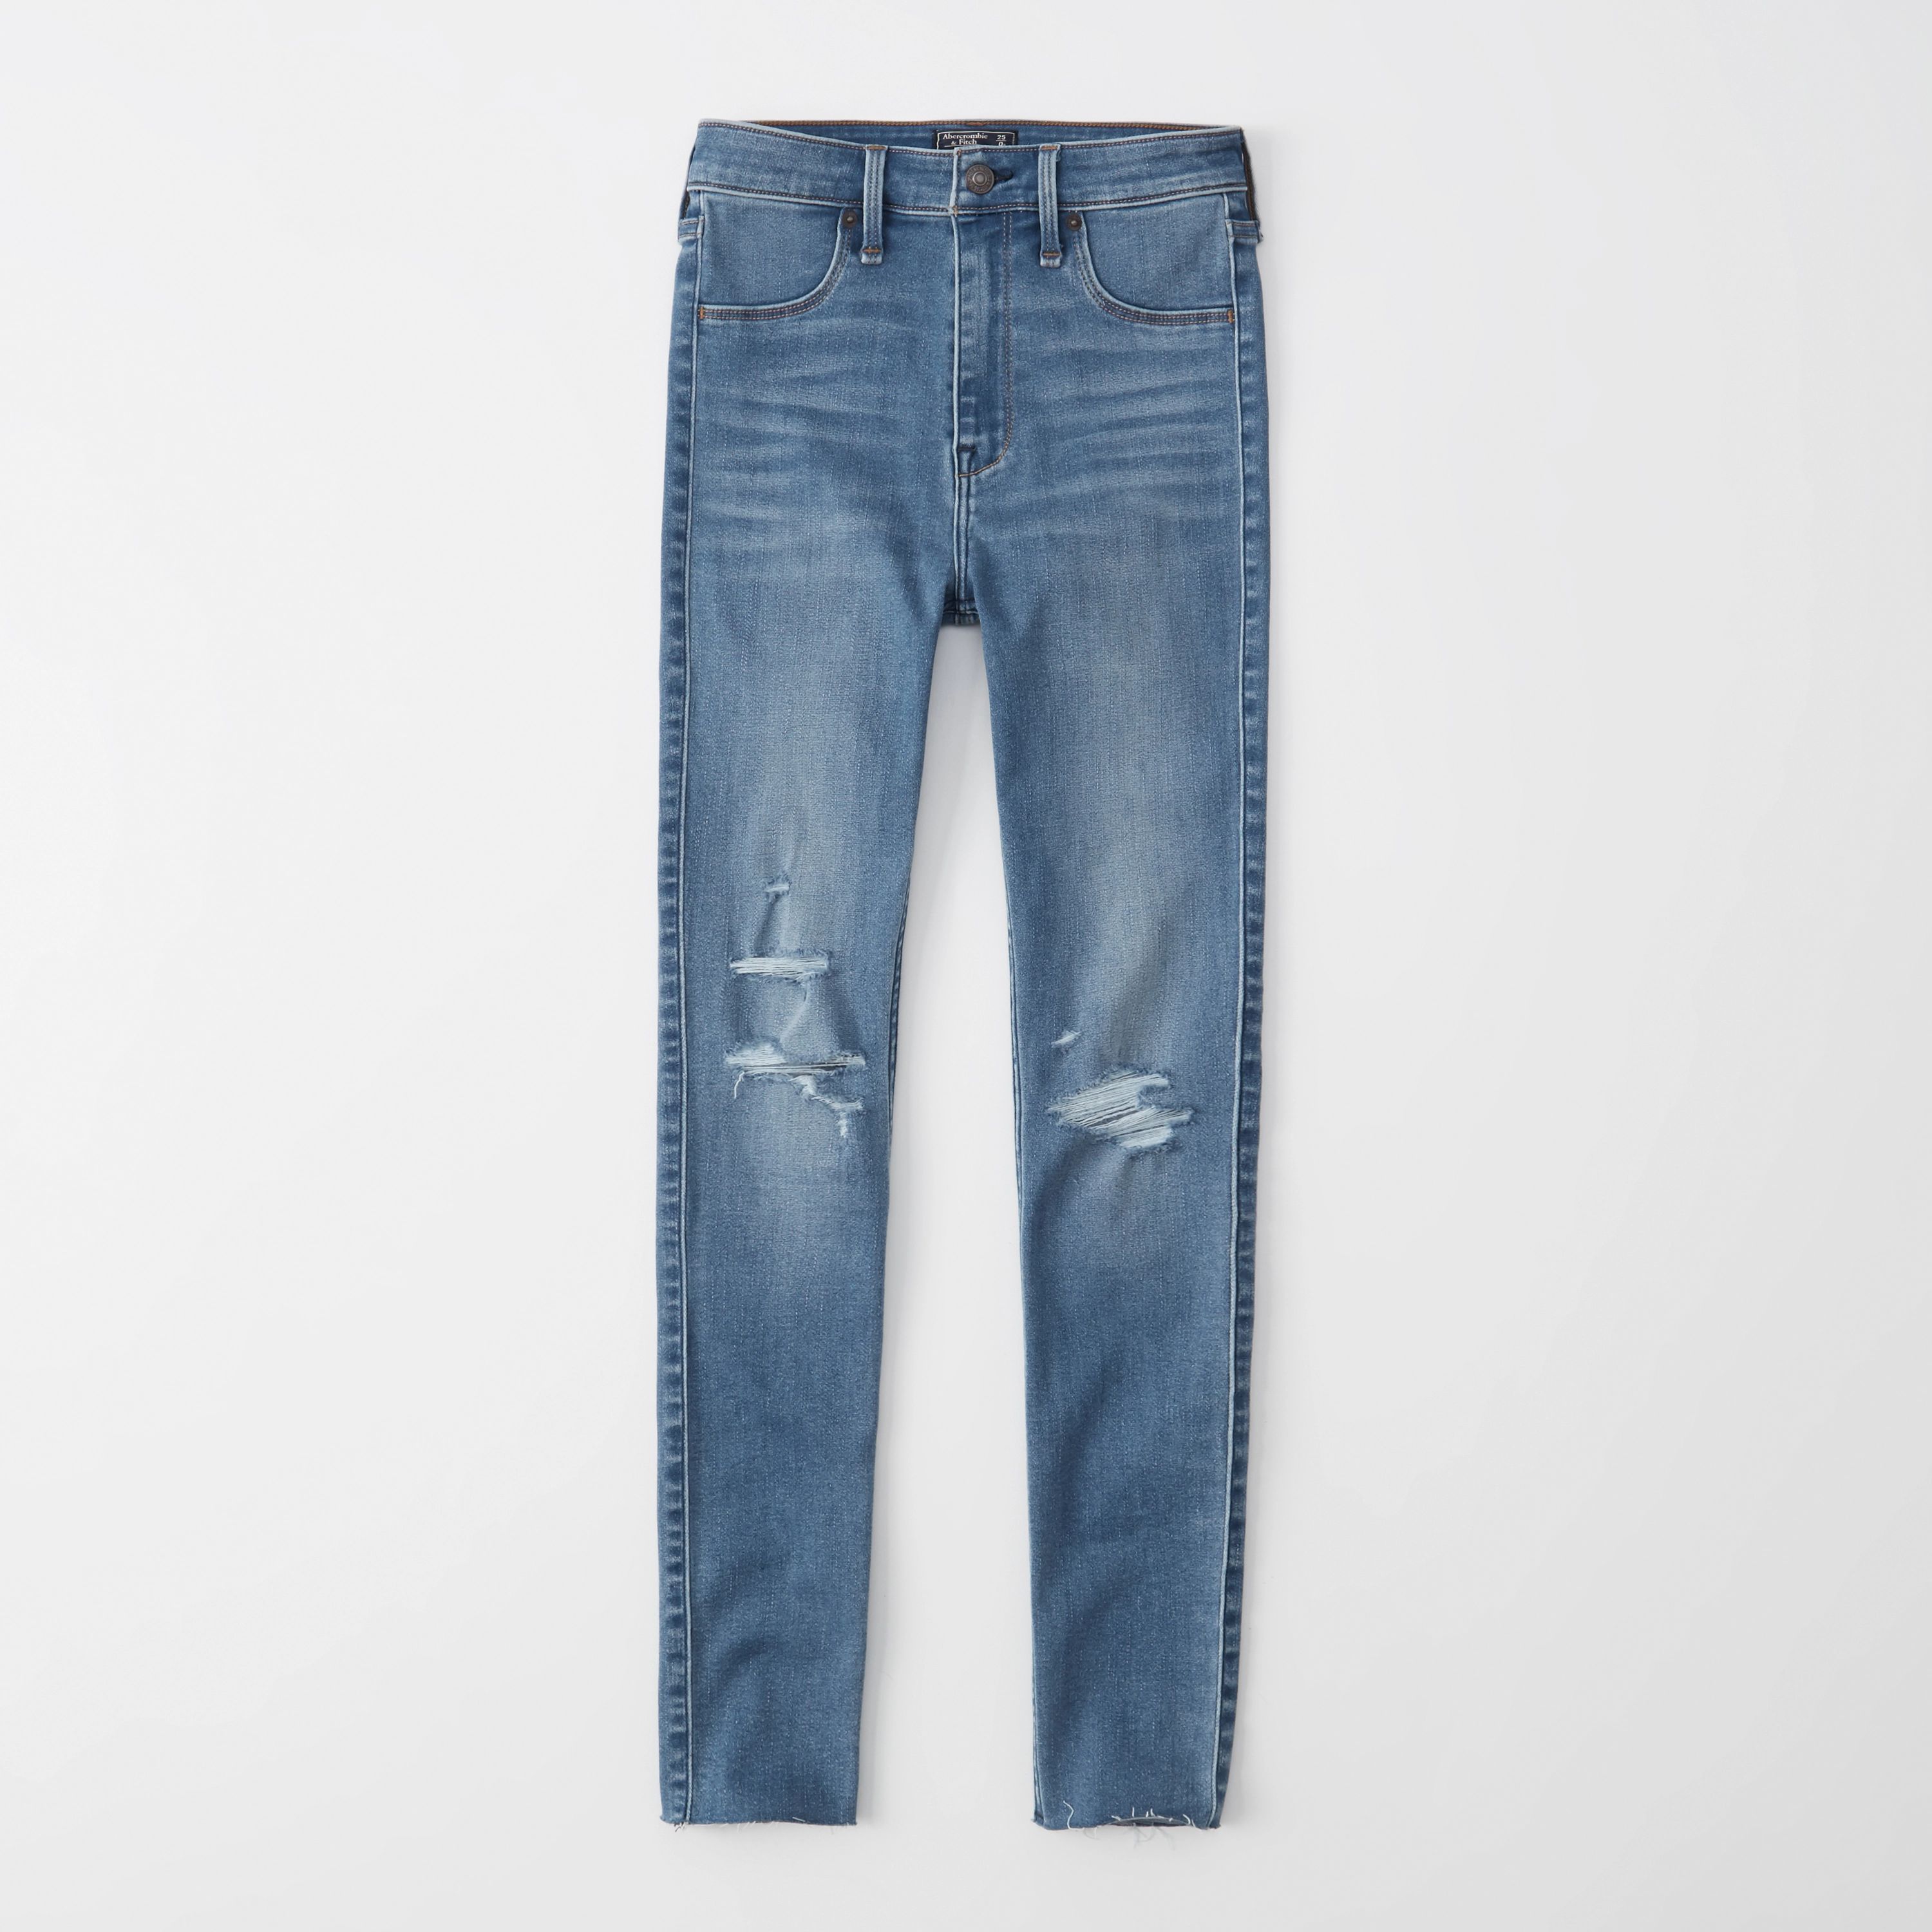 Ripped High Rise Jean Leggings | Abercrombie & Fitch (US)